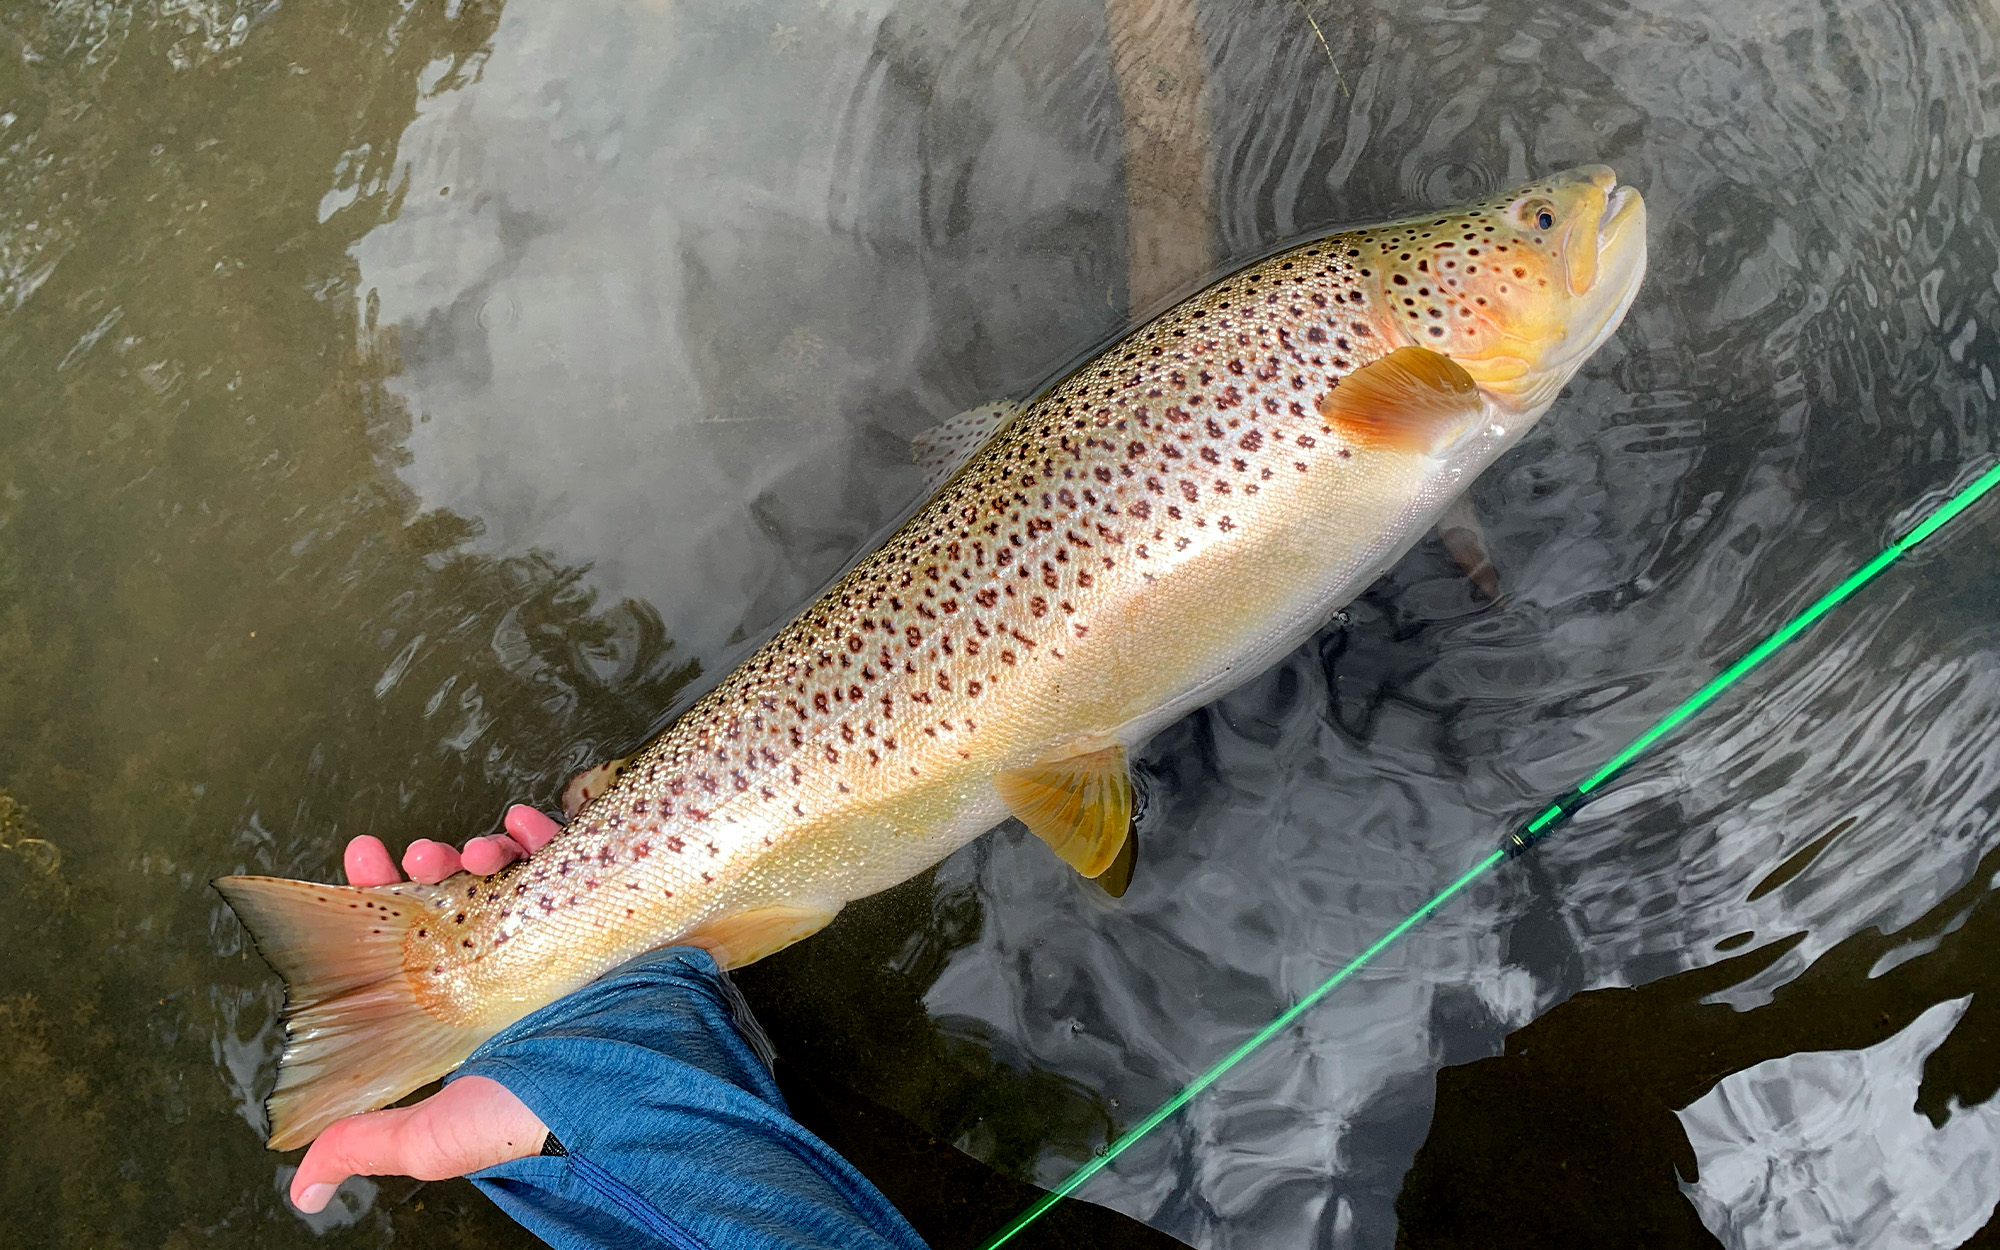 A brown trout caught in Missouri.